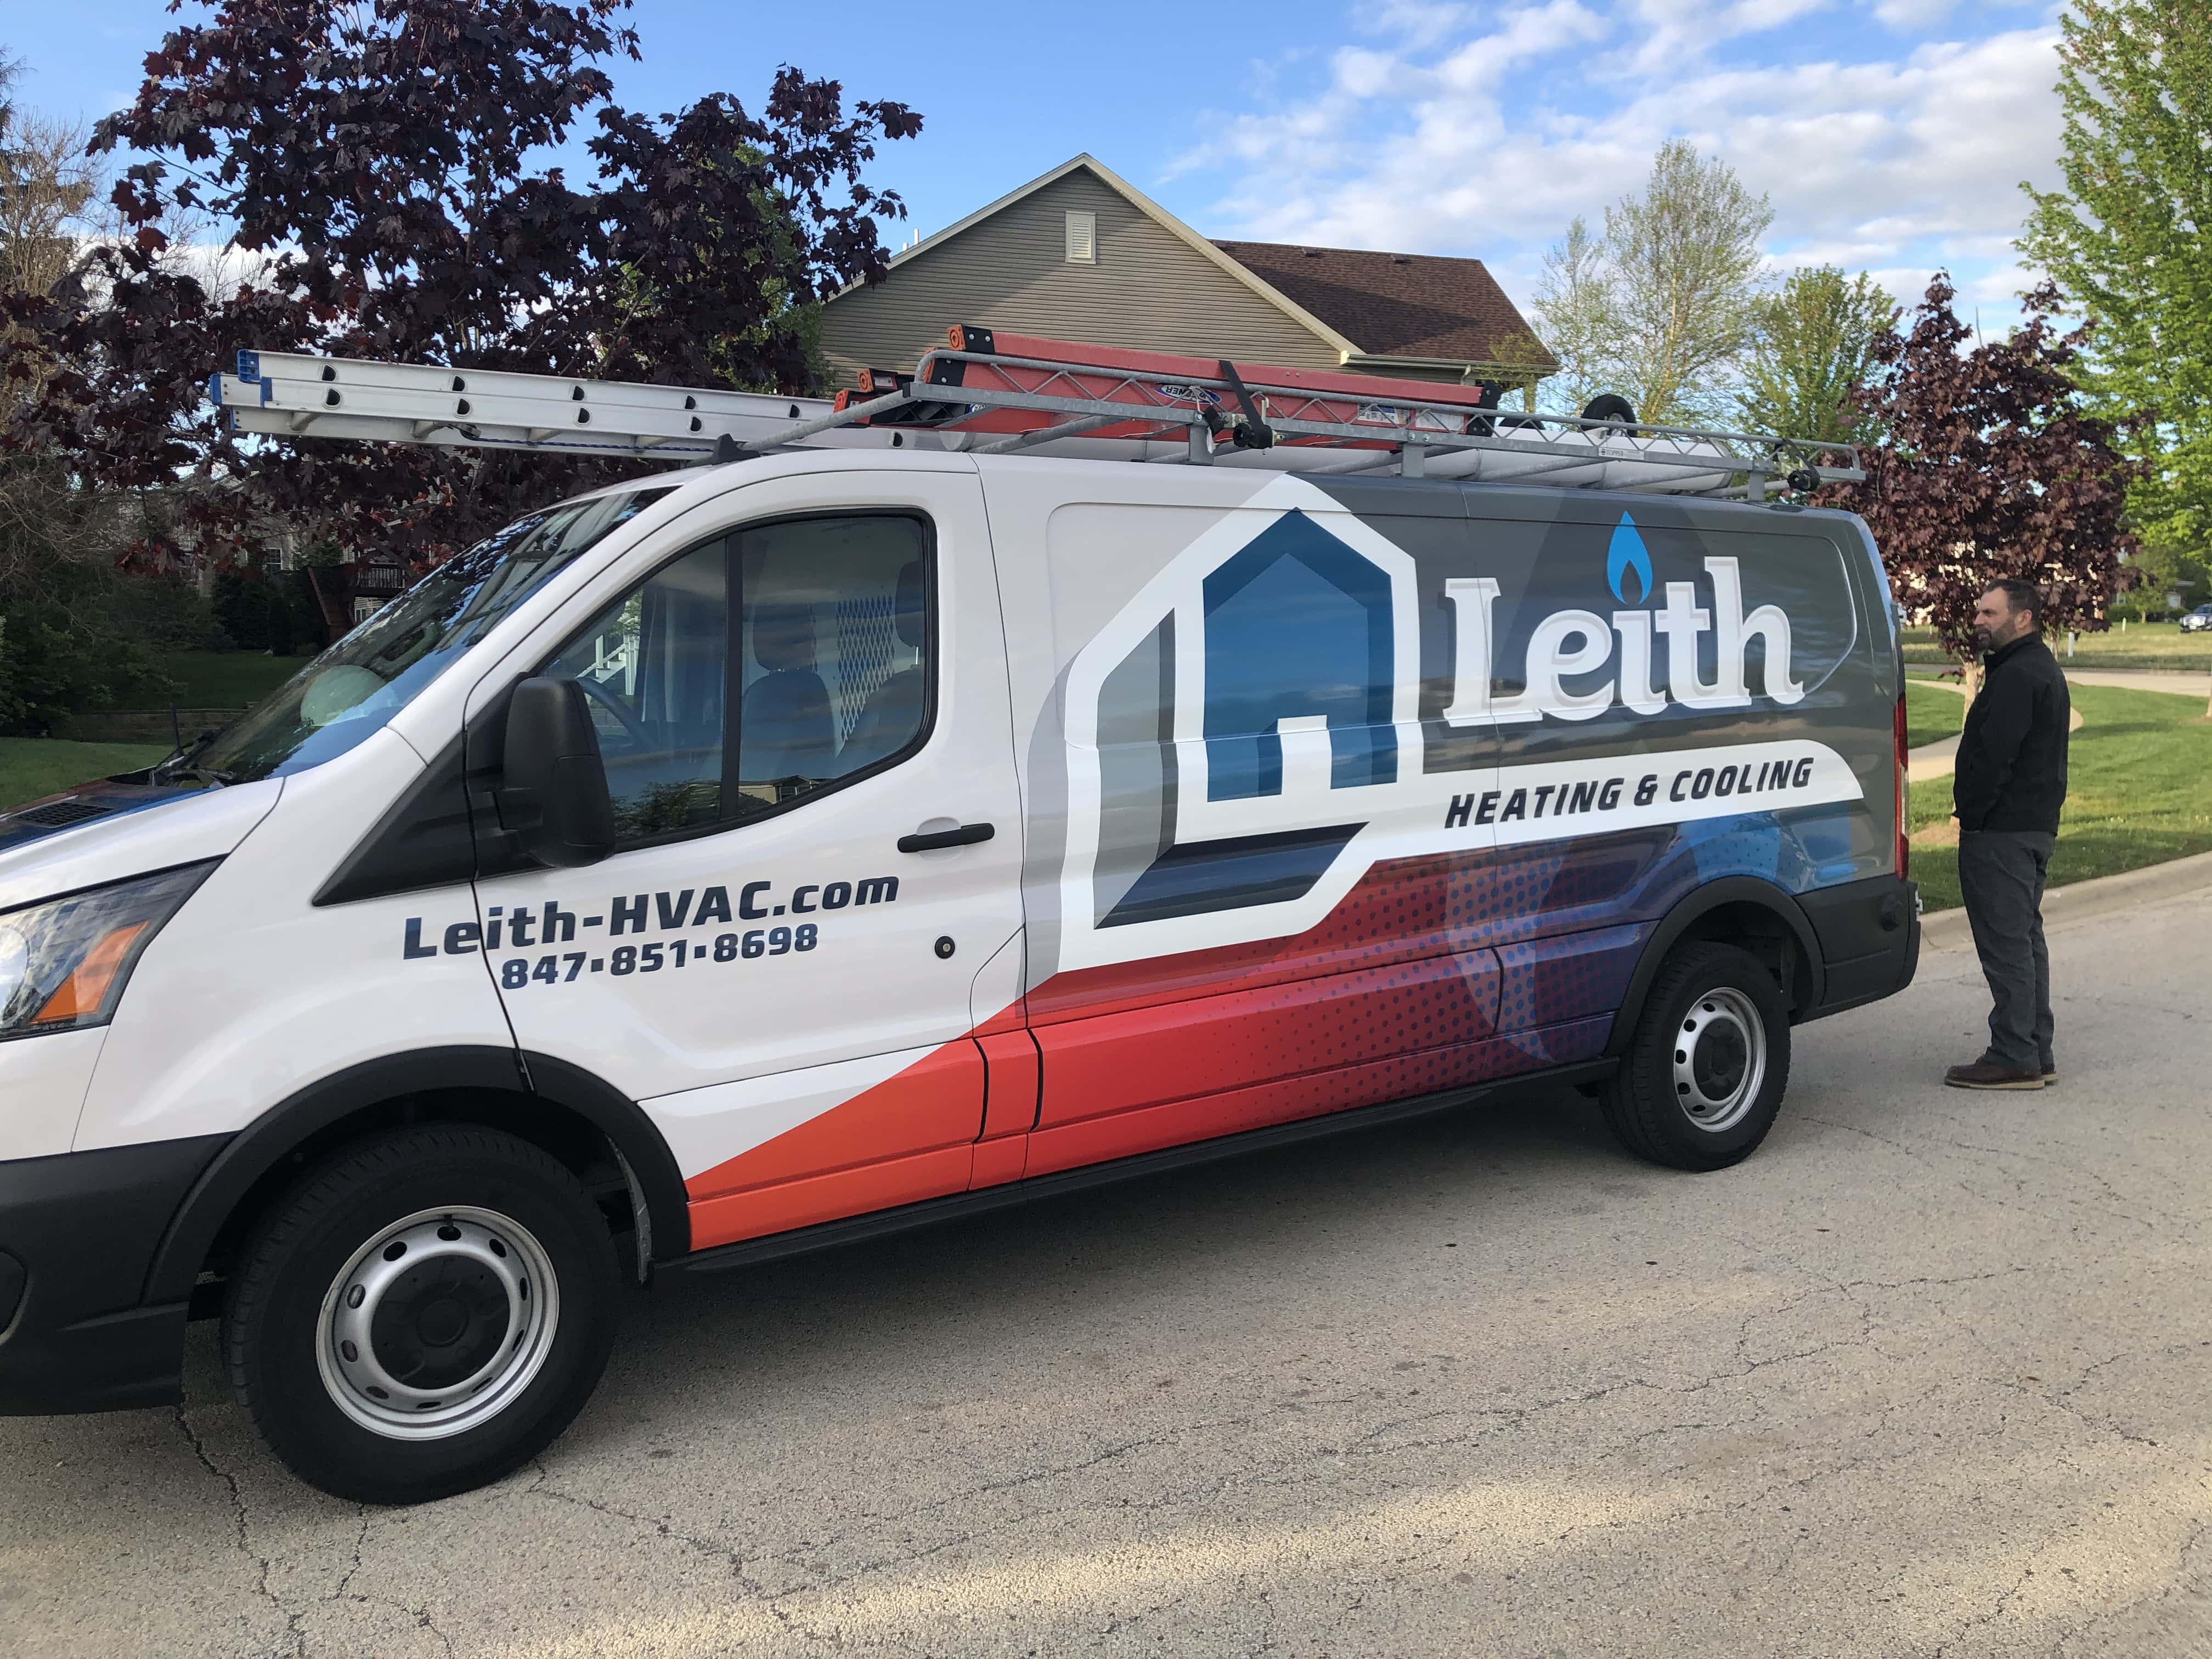 Leith Heating and Cooling Inc. - Elgin, IL, US, heating repair